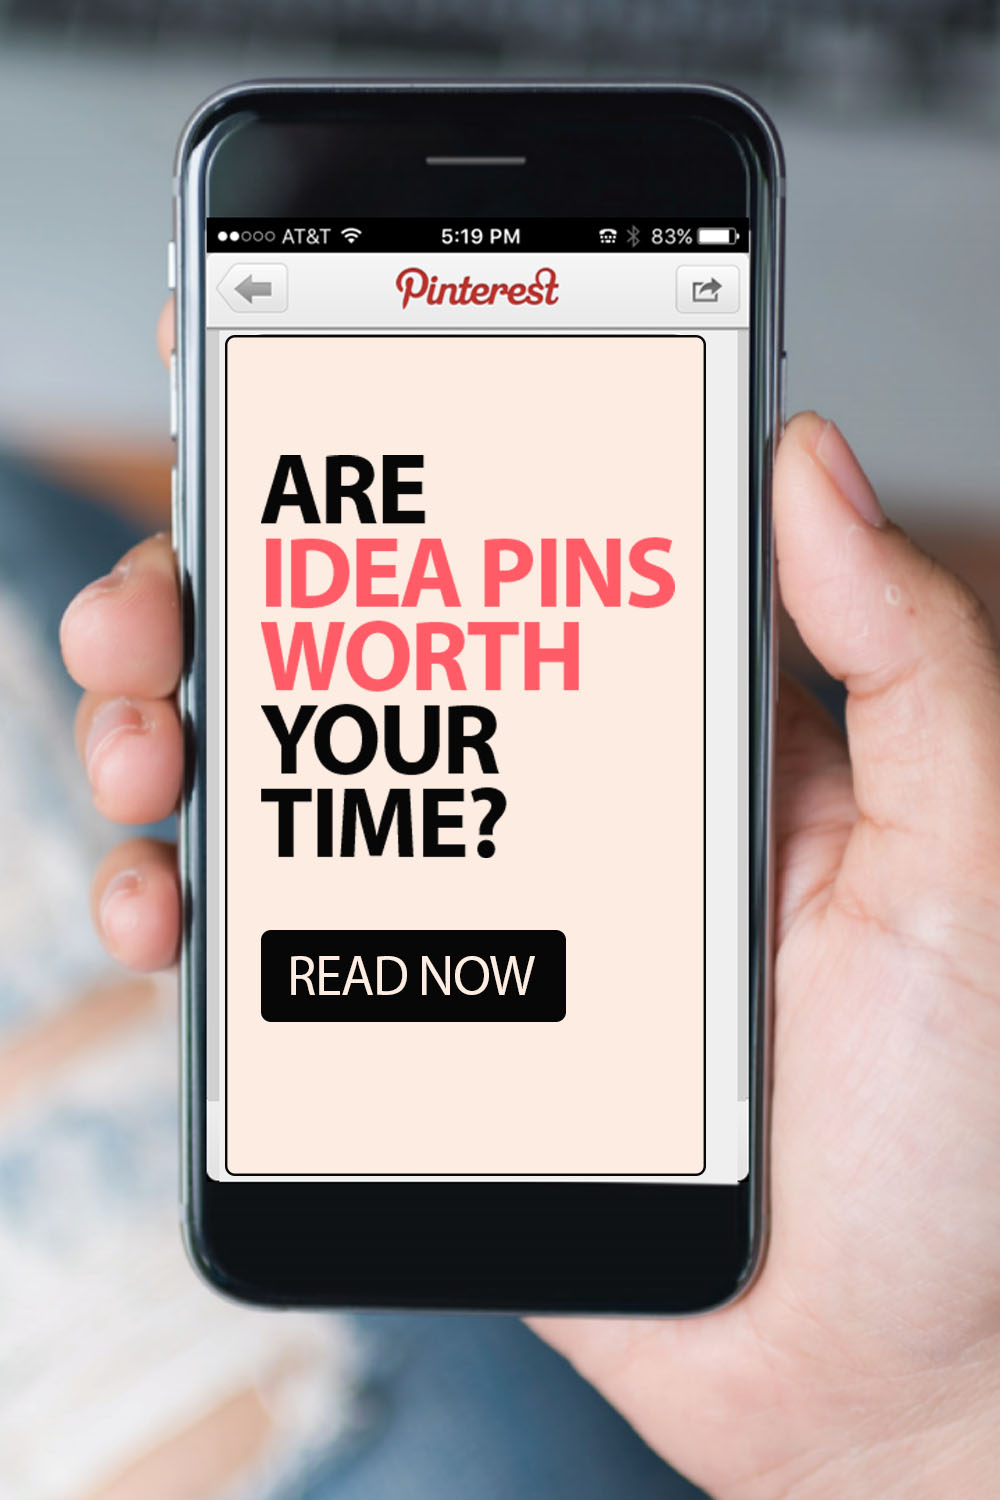 Idea Pins on Pinterest – Are they worth your time?